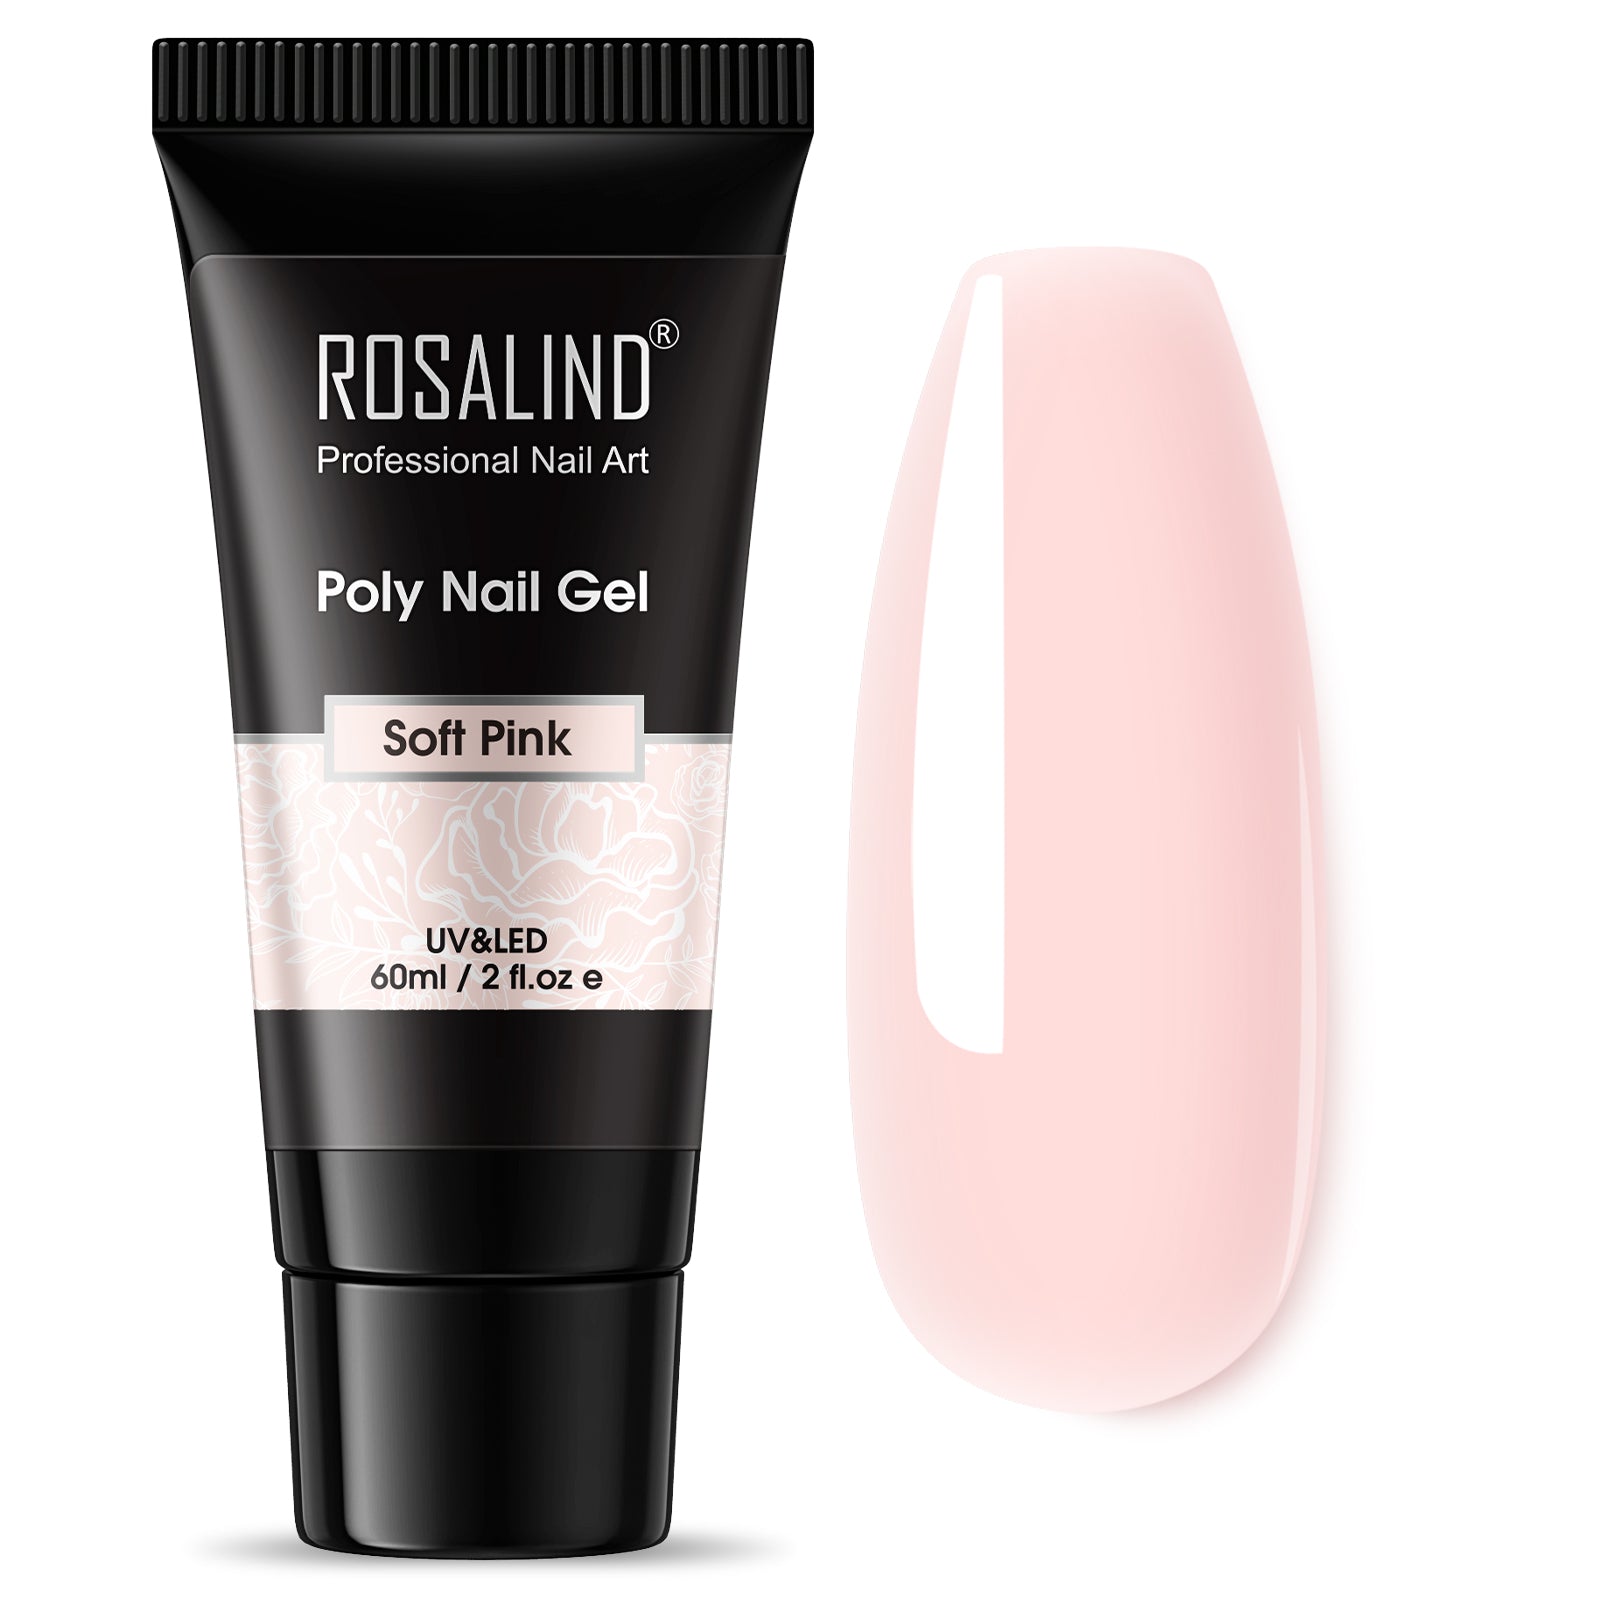 ROSALIND 60ml Poly Nail Gel Hot Sale Fashion Colors Quick Builder Extension